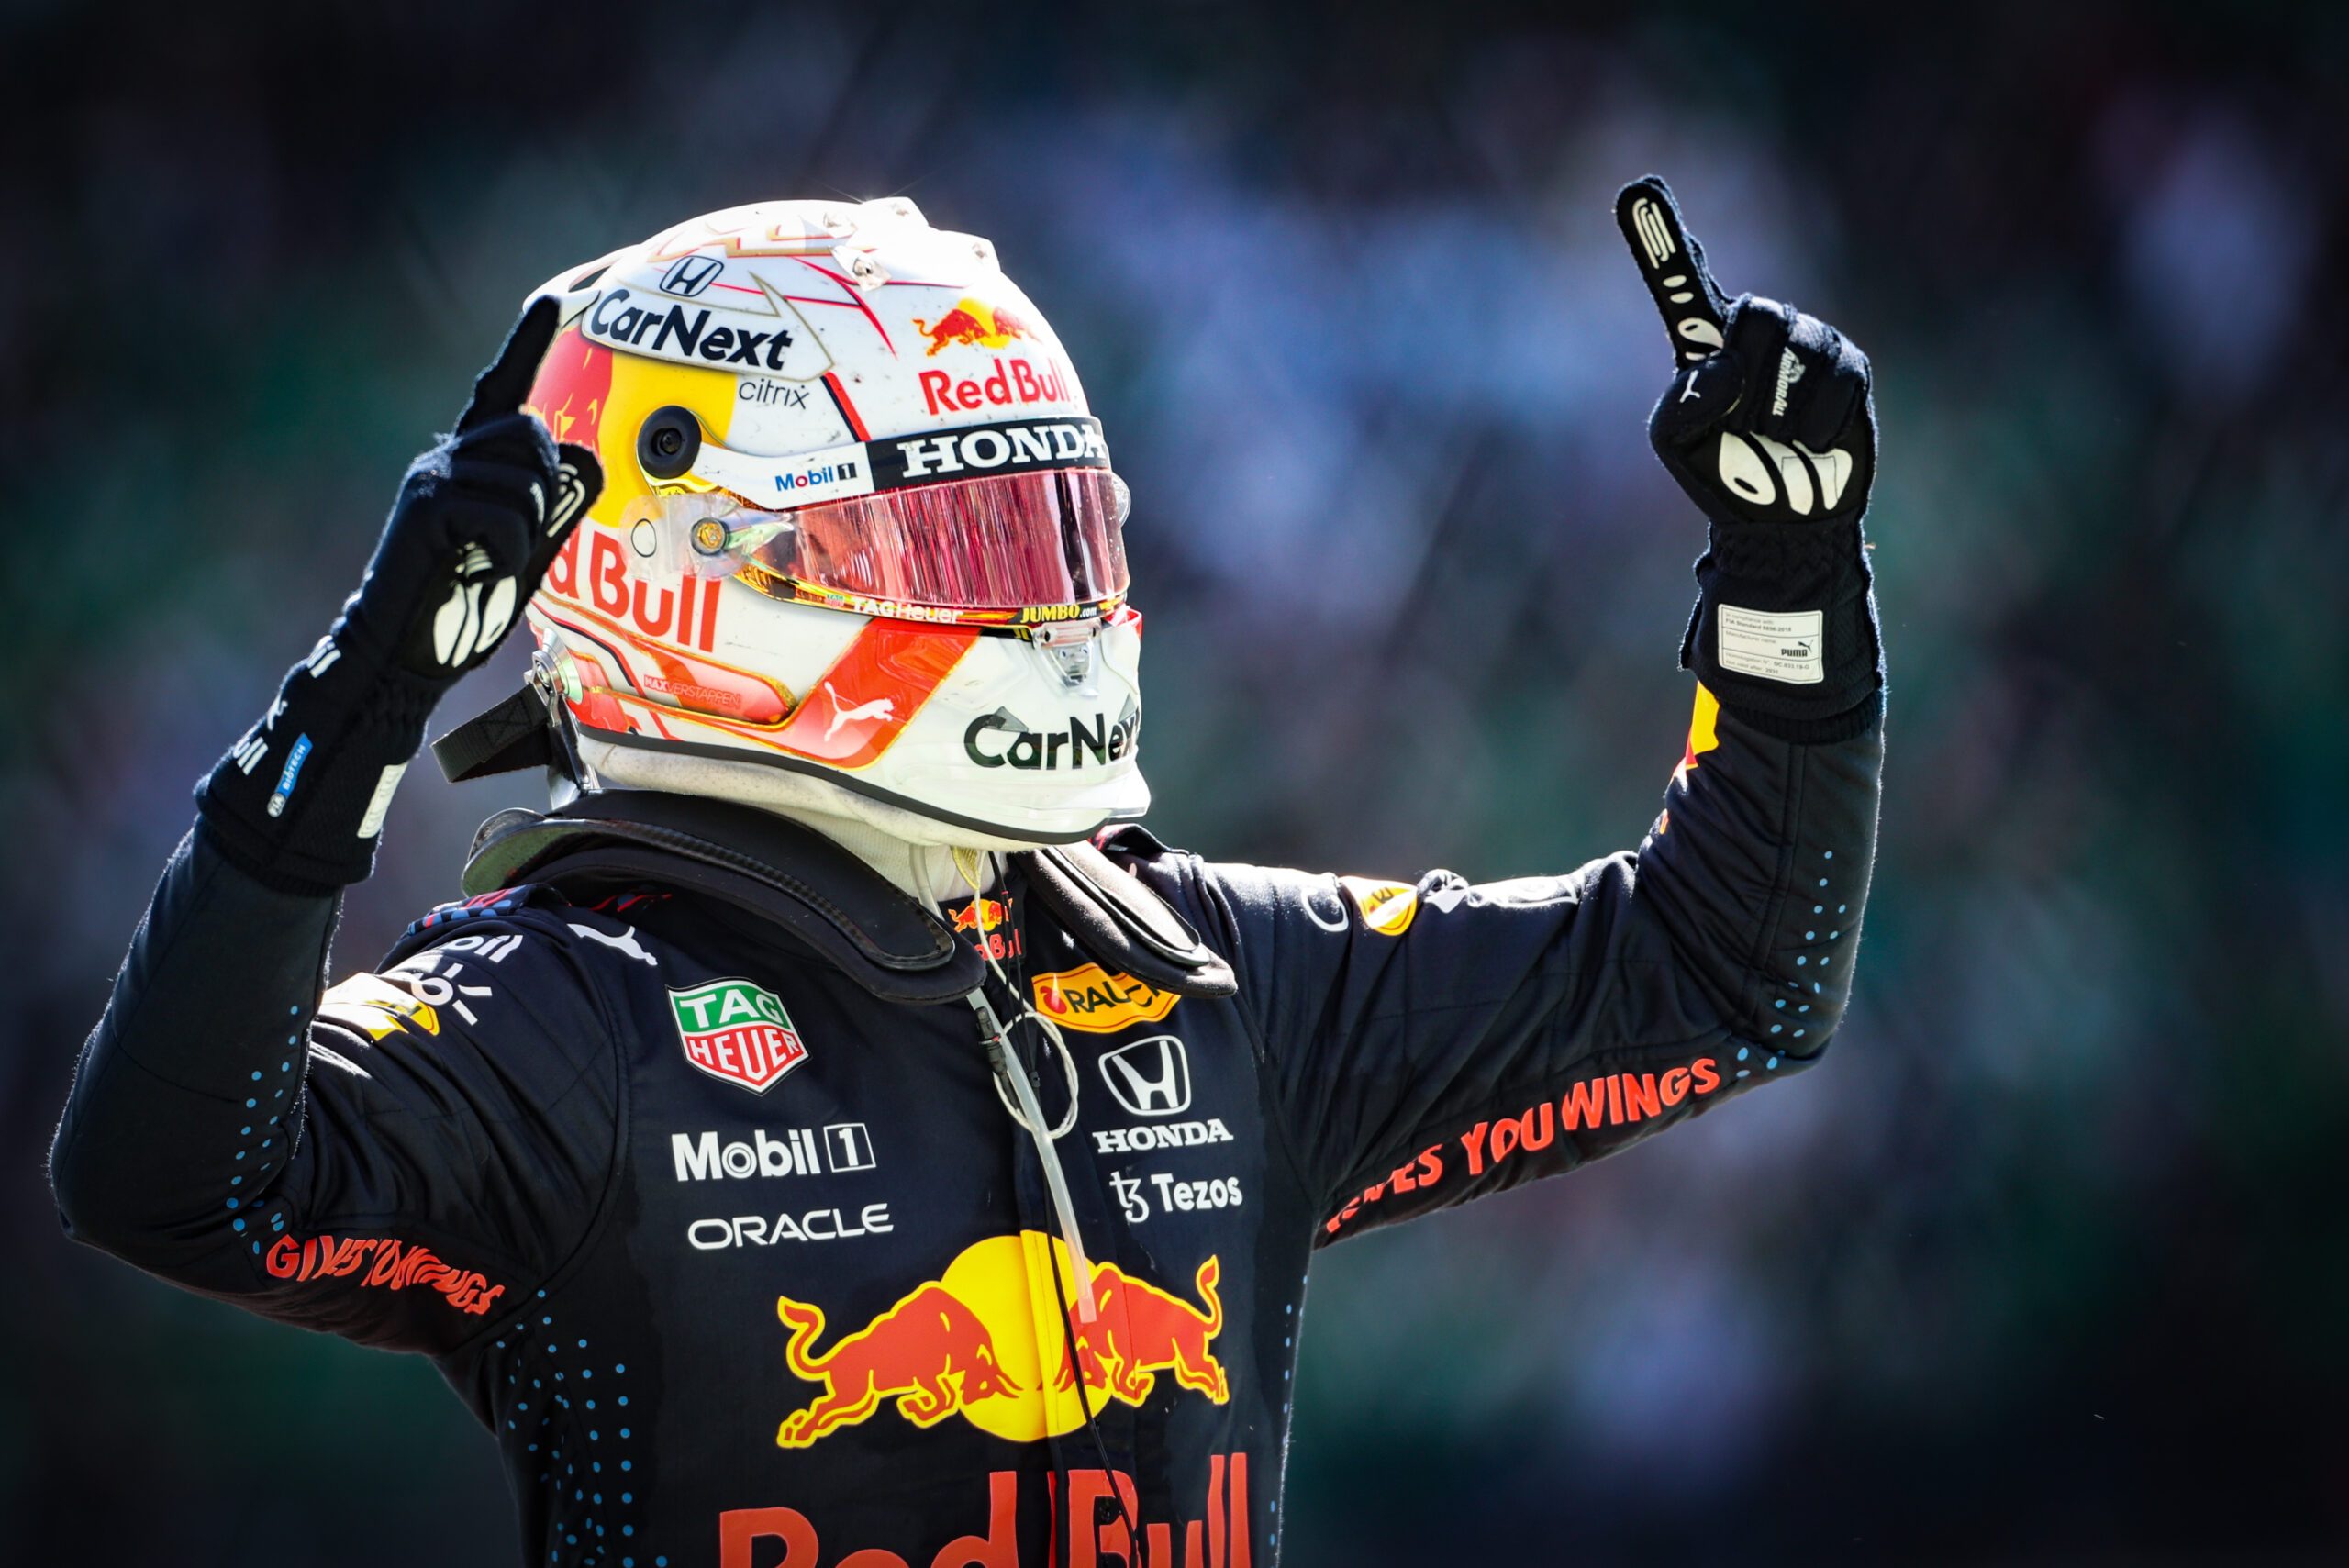 MEXICO CITY,MEXICO,07.NOV.21 - MOTORSPORTS, FORMULA 1 - Grand Prix of Mexico, Autodromo Hermanos Rodriguez. Image shows the rejoicing of Max Verstappen (NED/ Red Bull Racing).